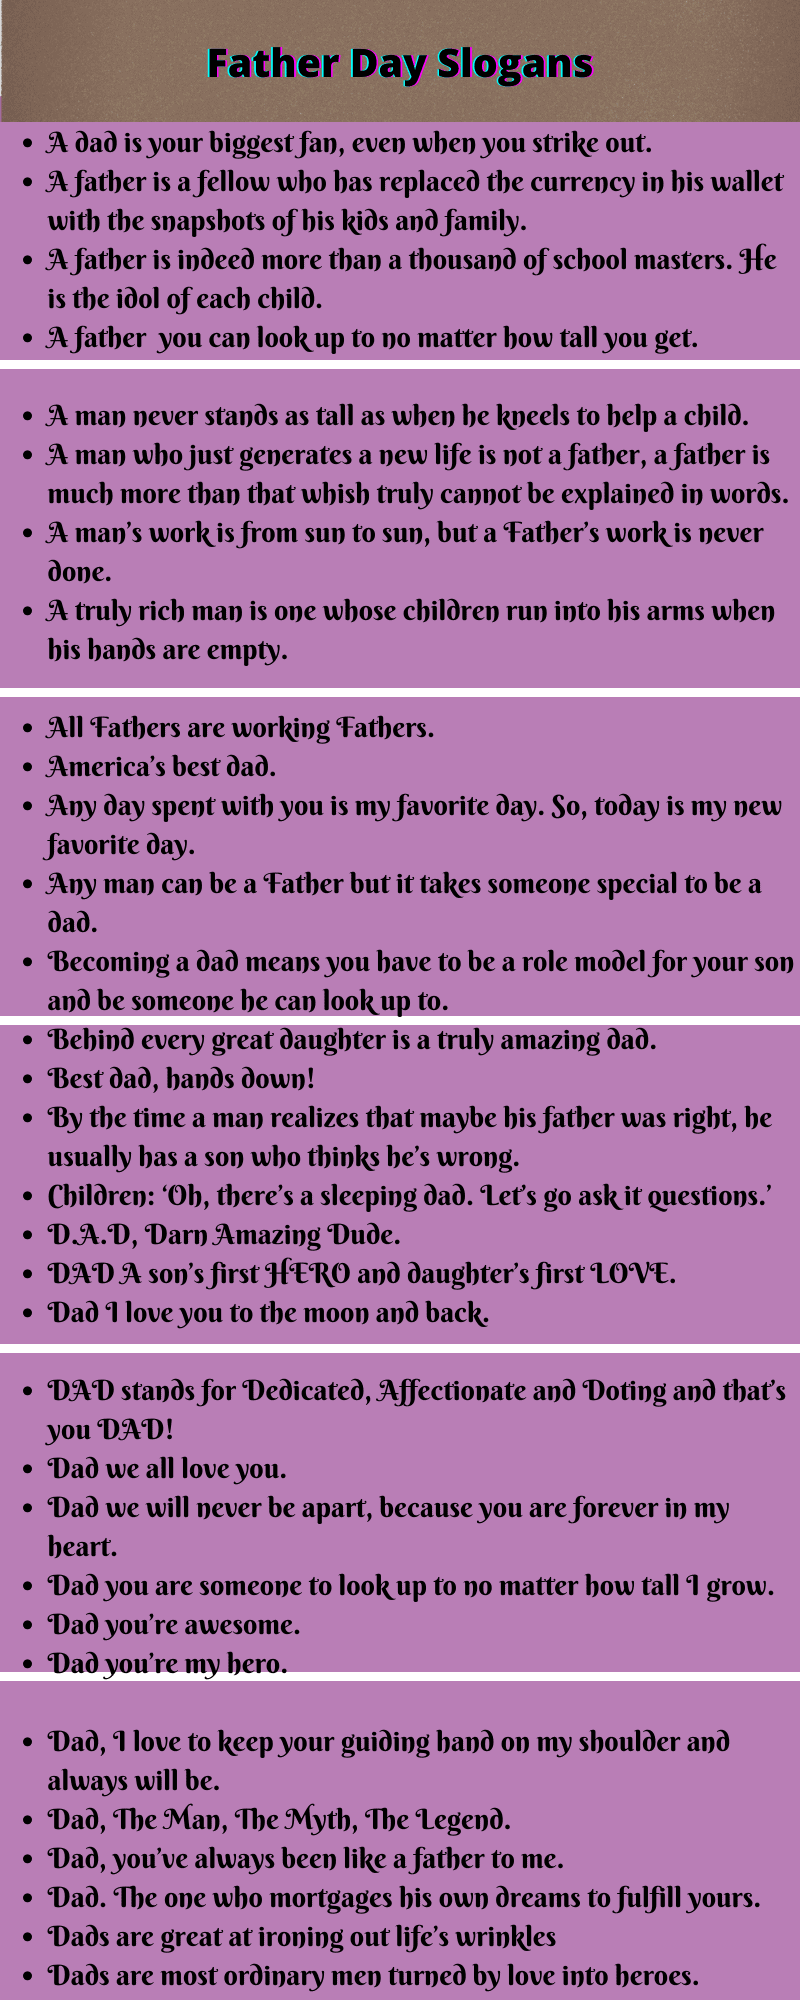 Father Day Slogans